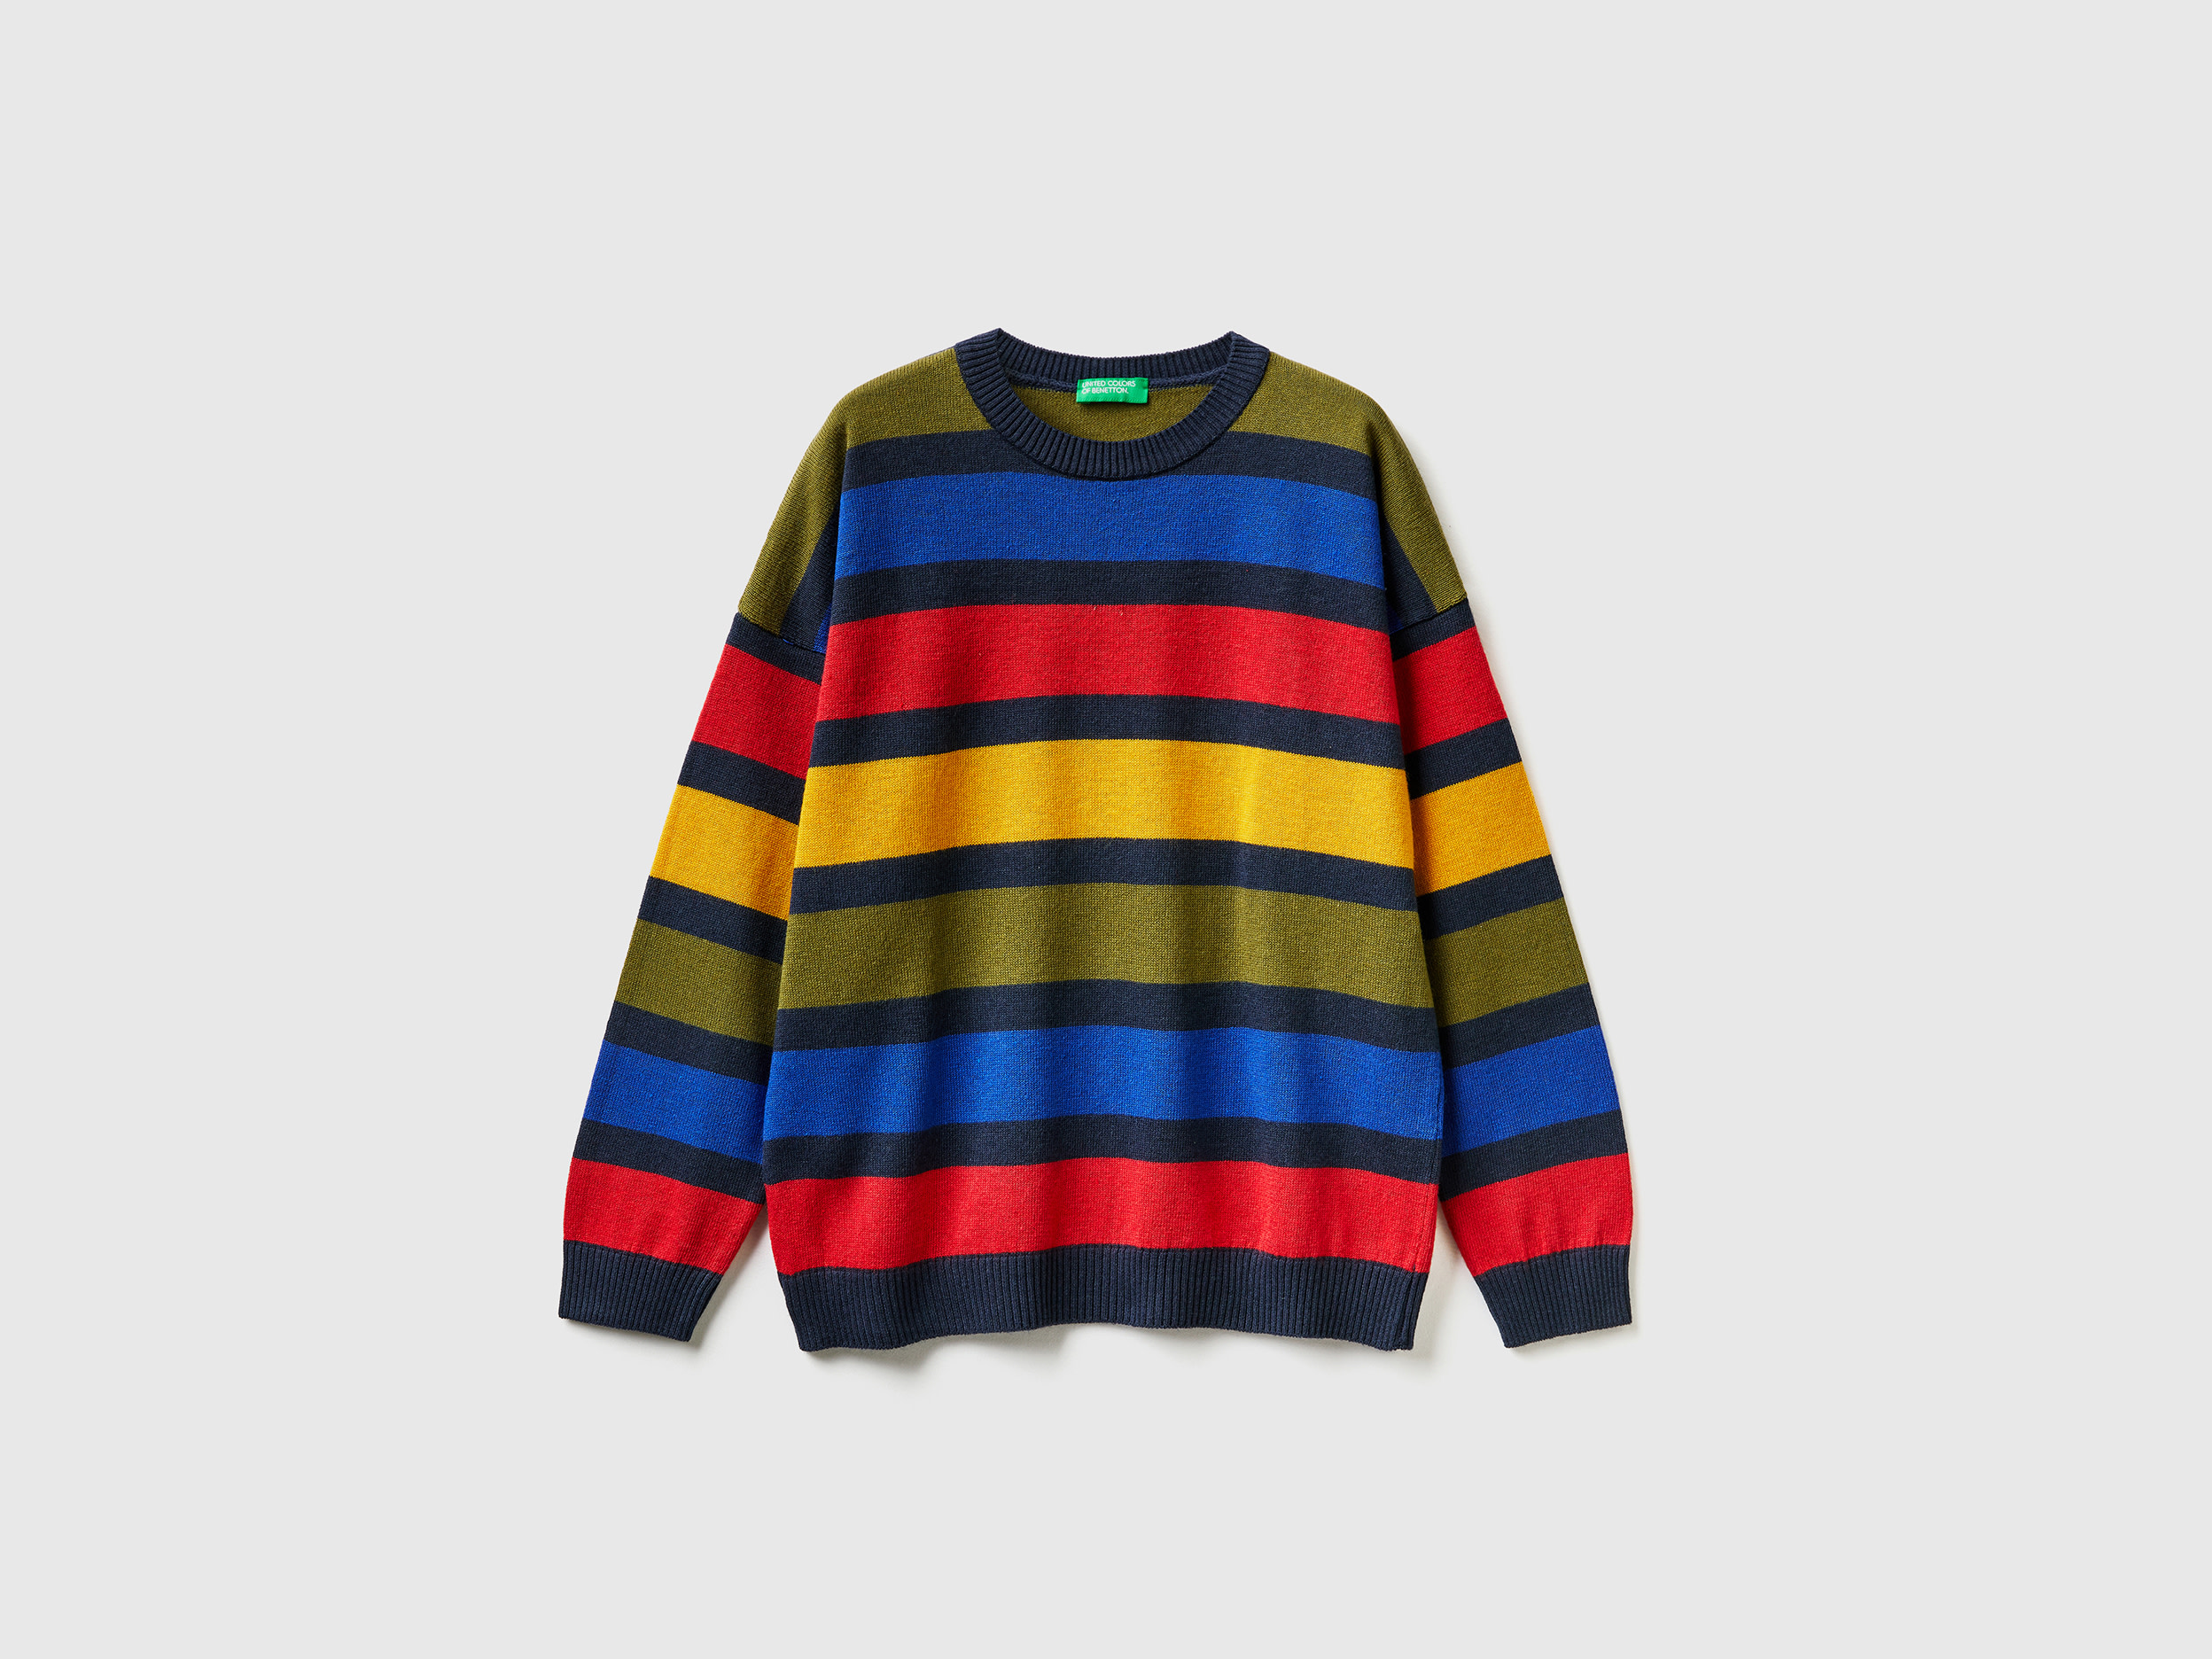 Benetton, Striped Sweater In Wool And Cotton Blend, size M, Multi-color, Kids